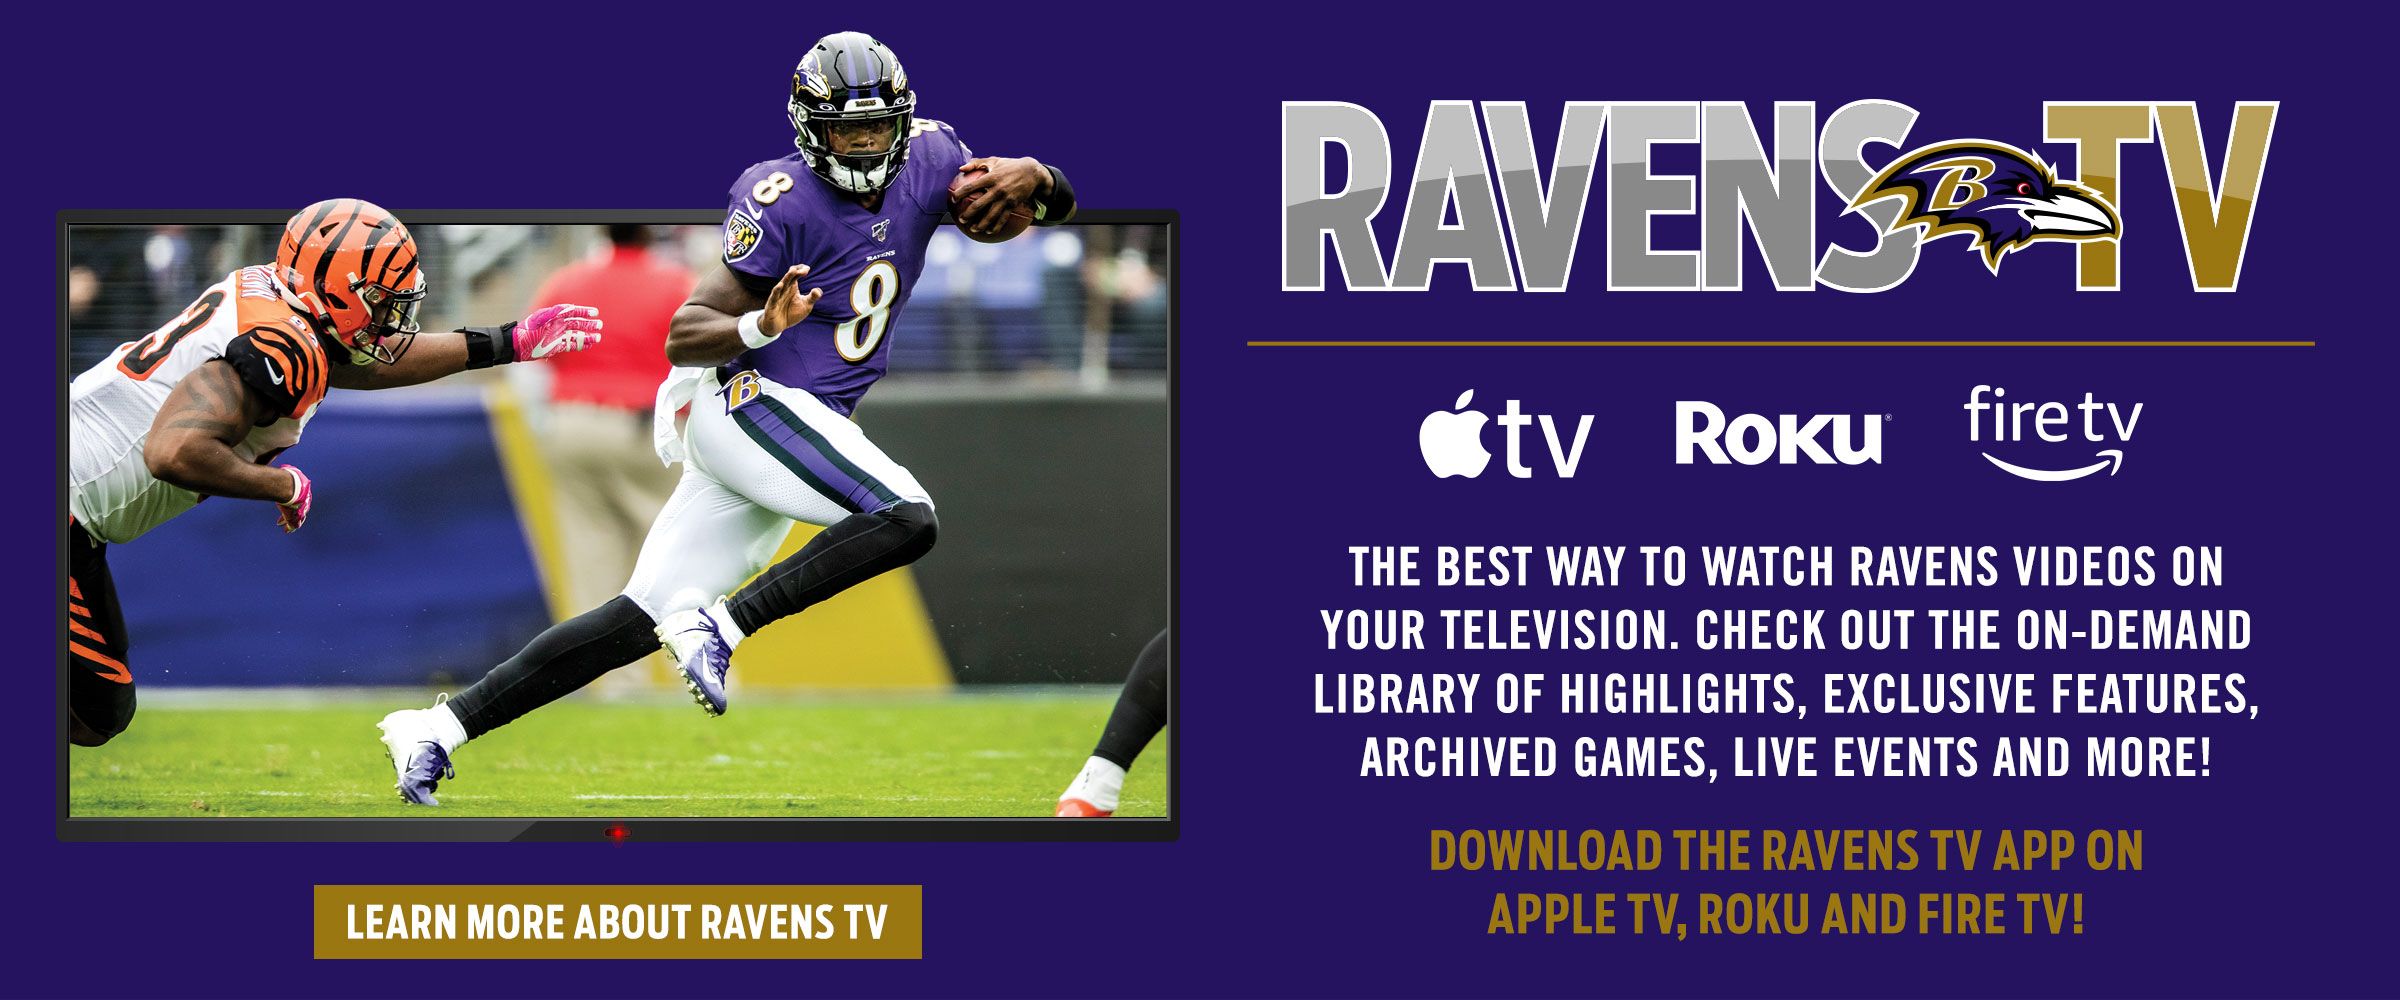 are the ravens on tv today